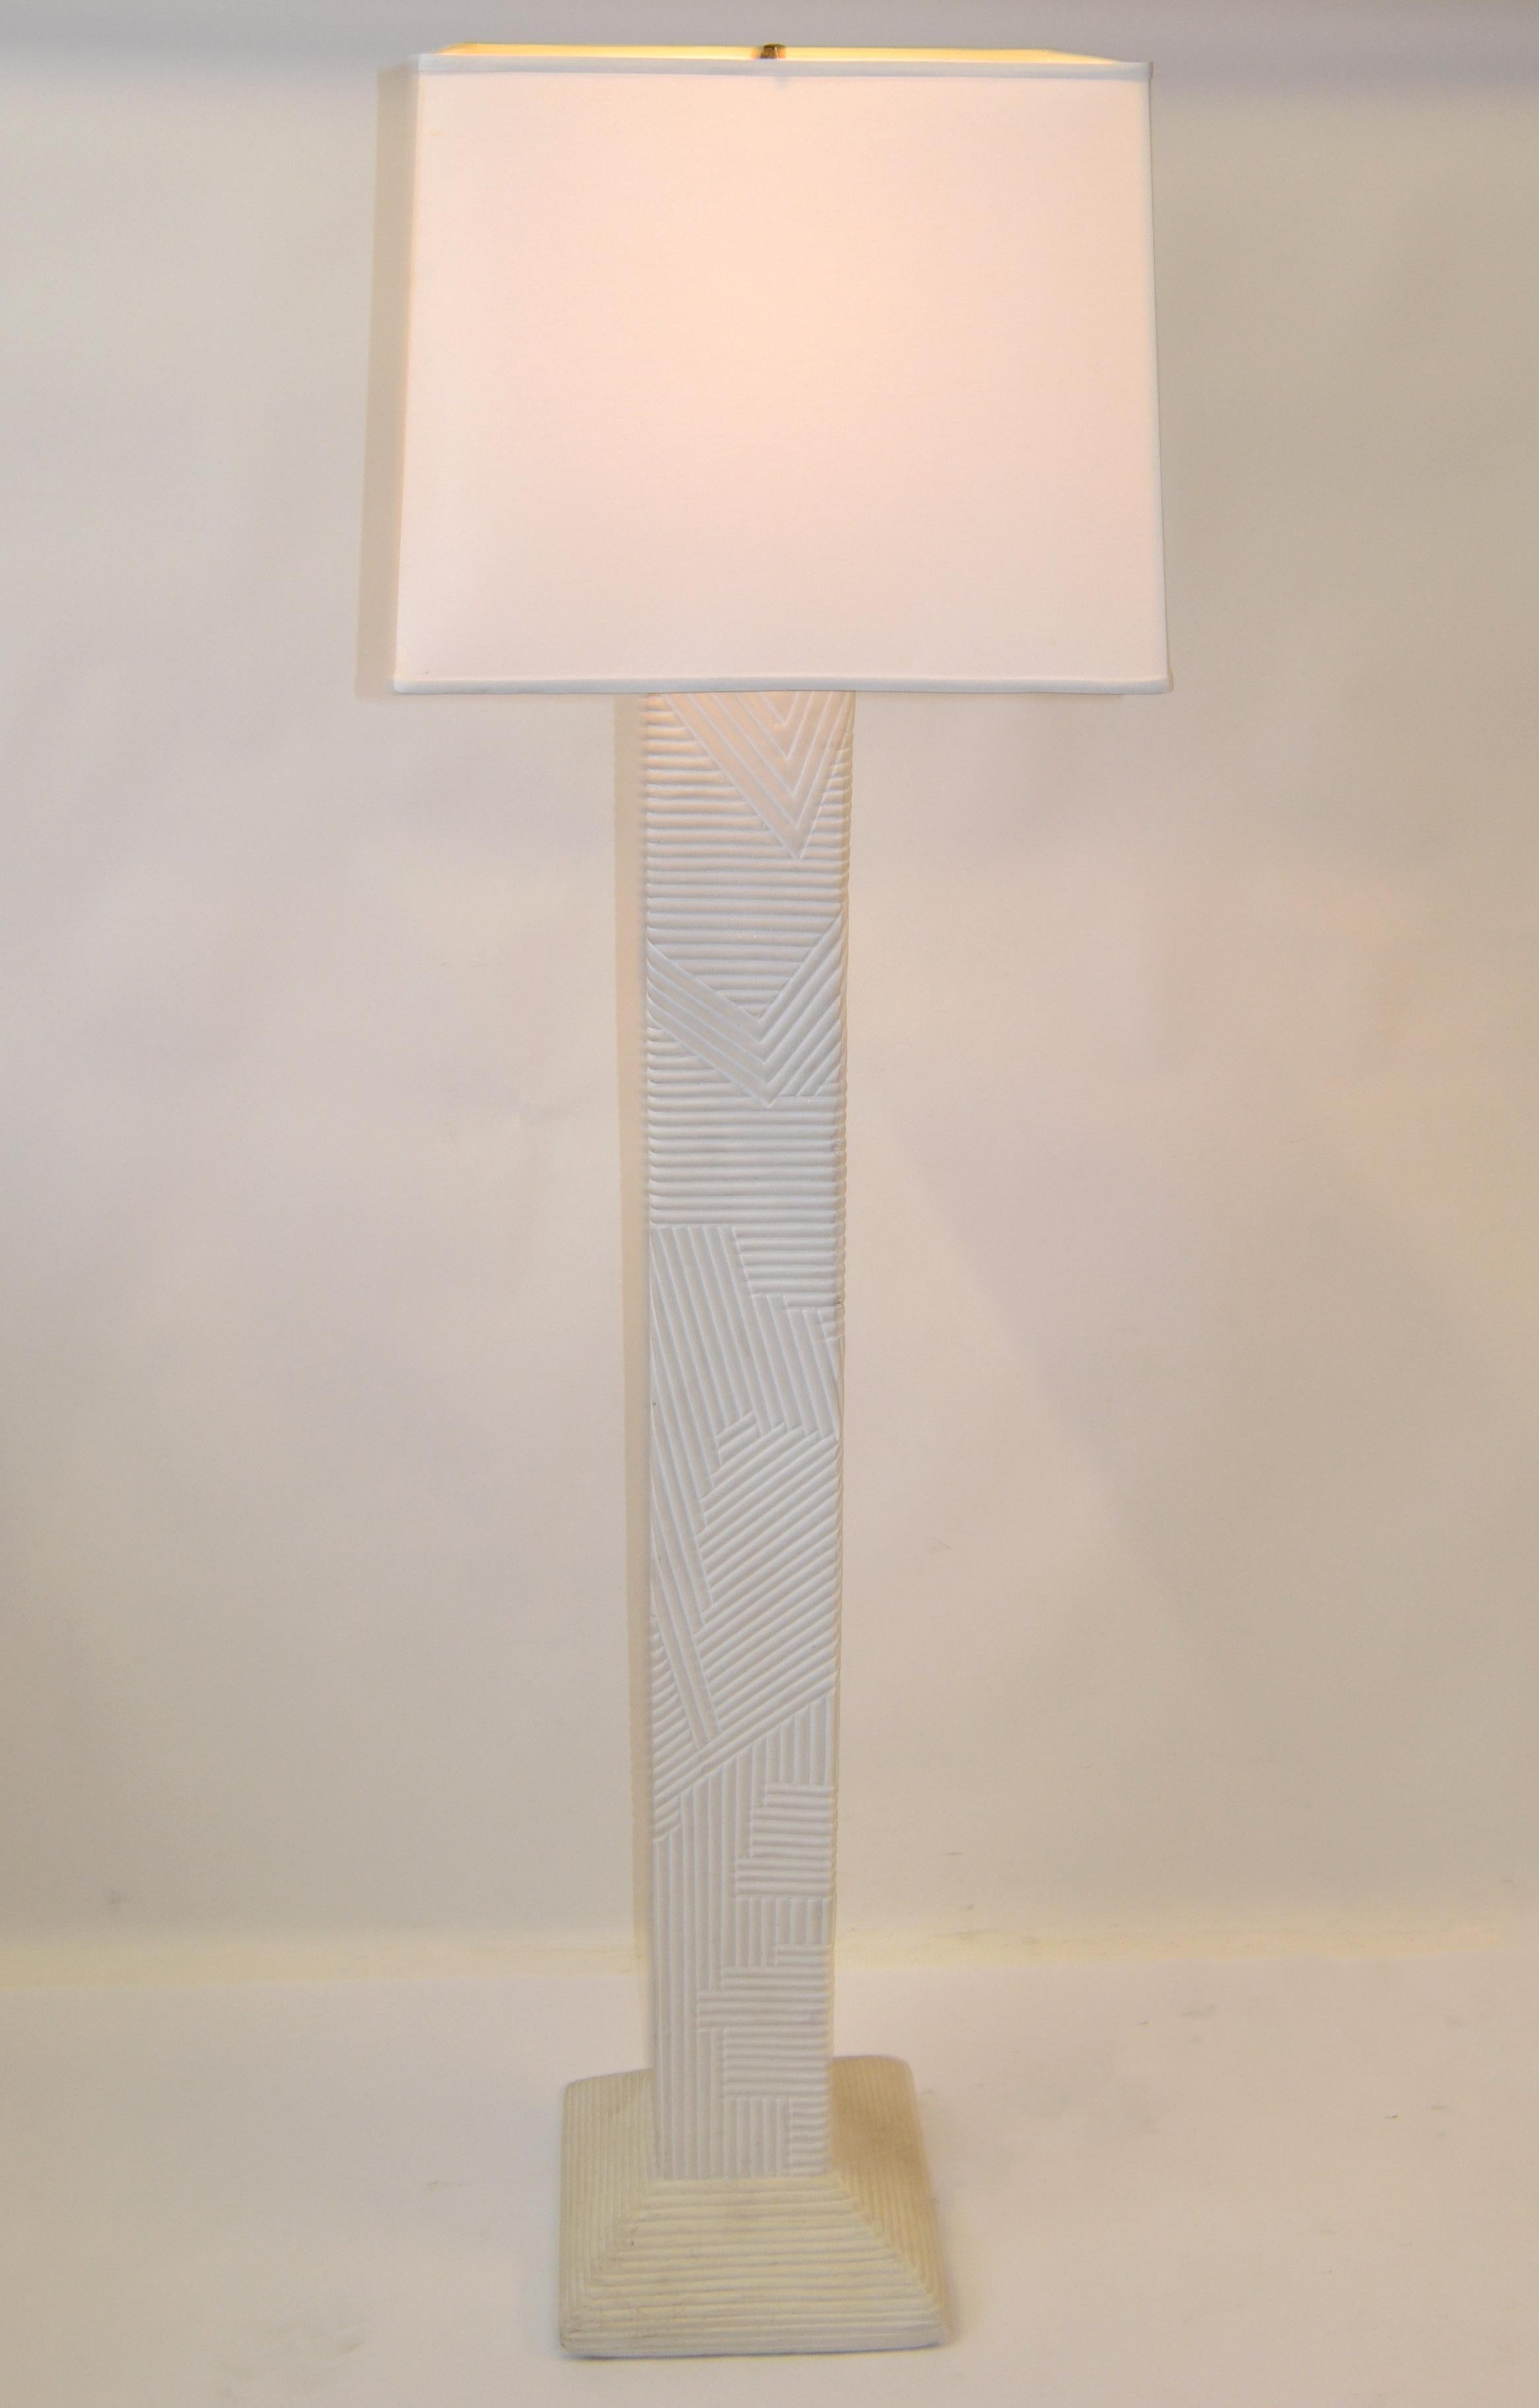 1970 Mid-Century Modern Geometric Textured Iconic Sculptural Plaster Lamp Sirmos For Sale 7